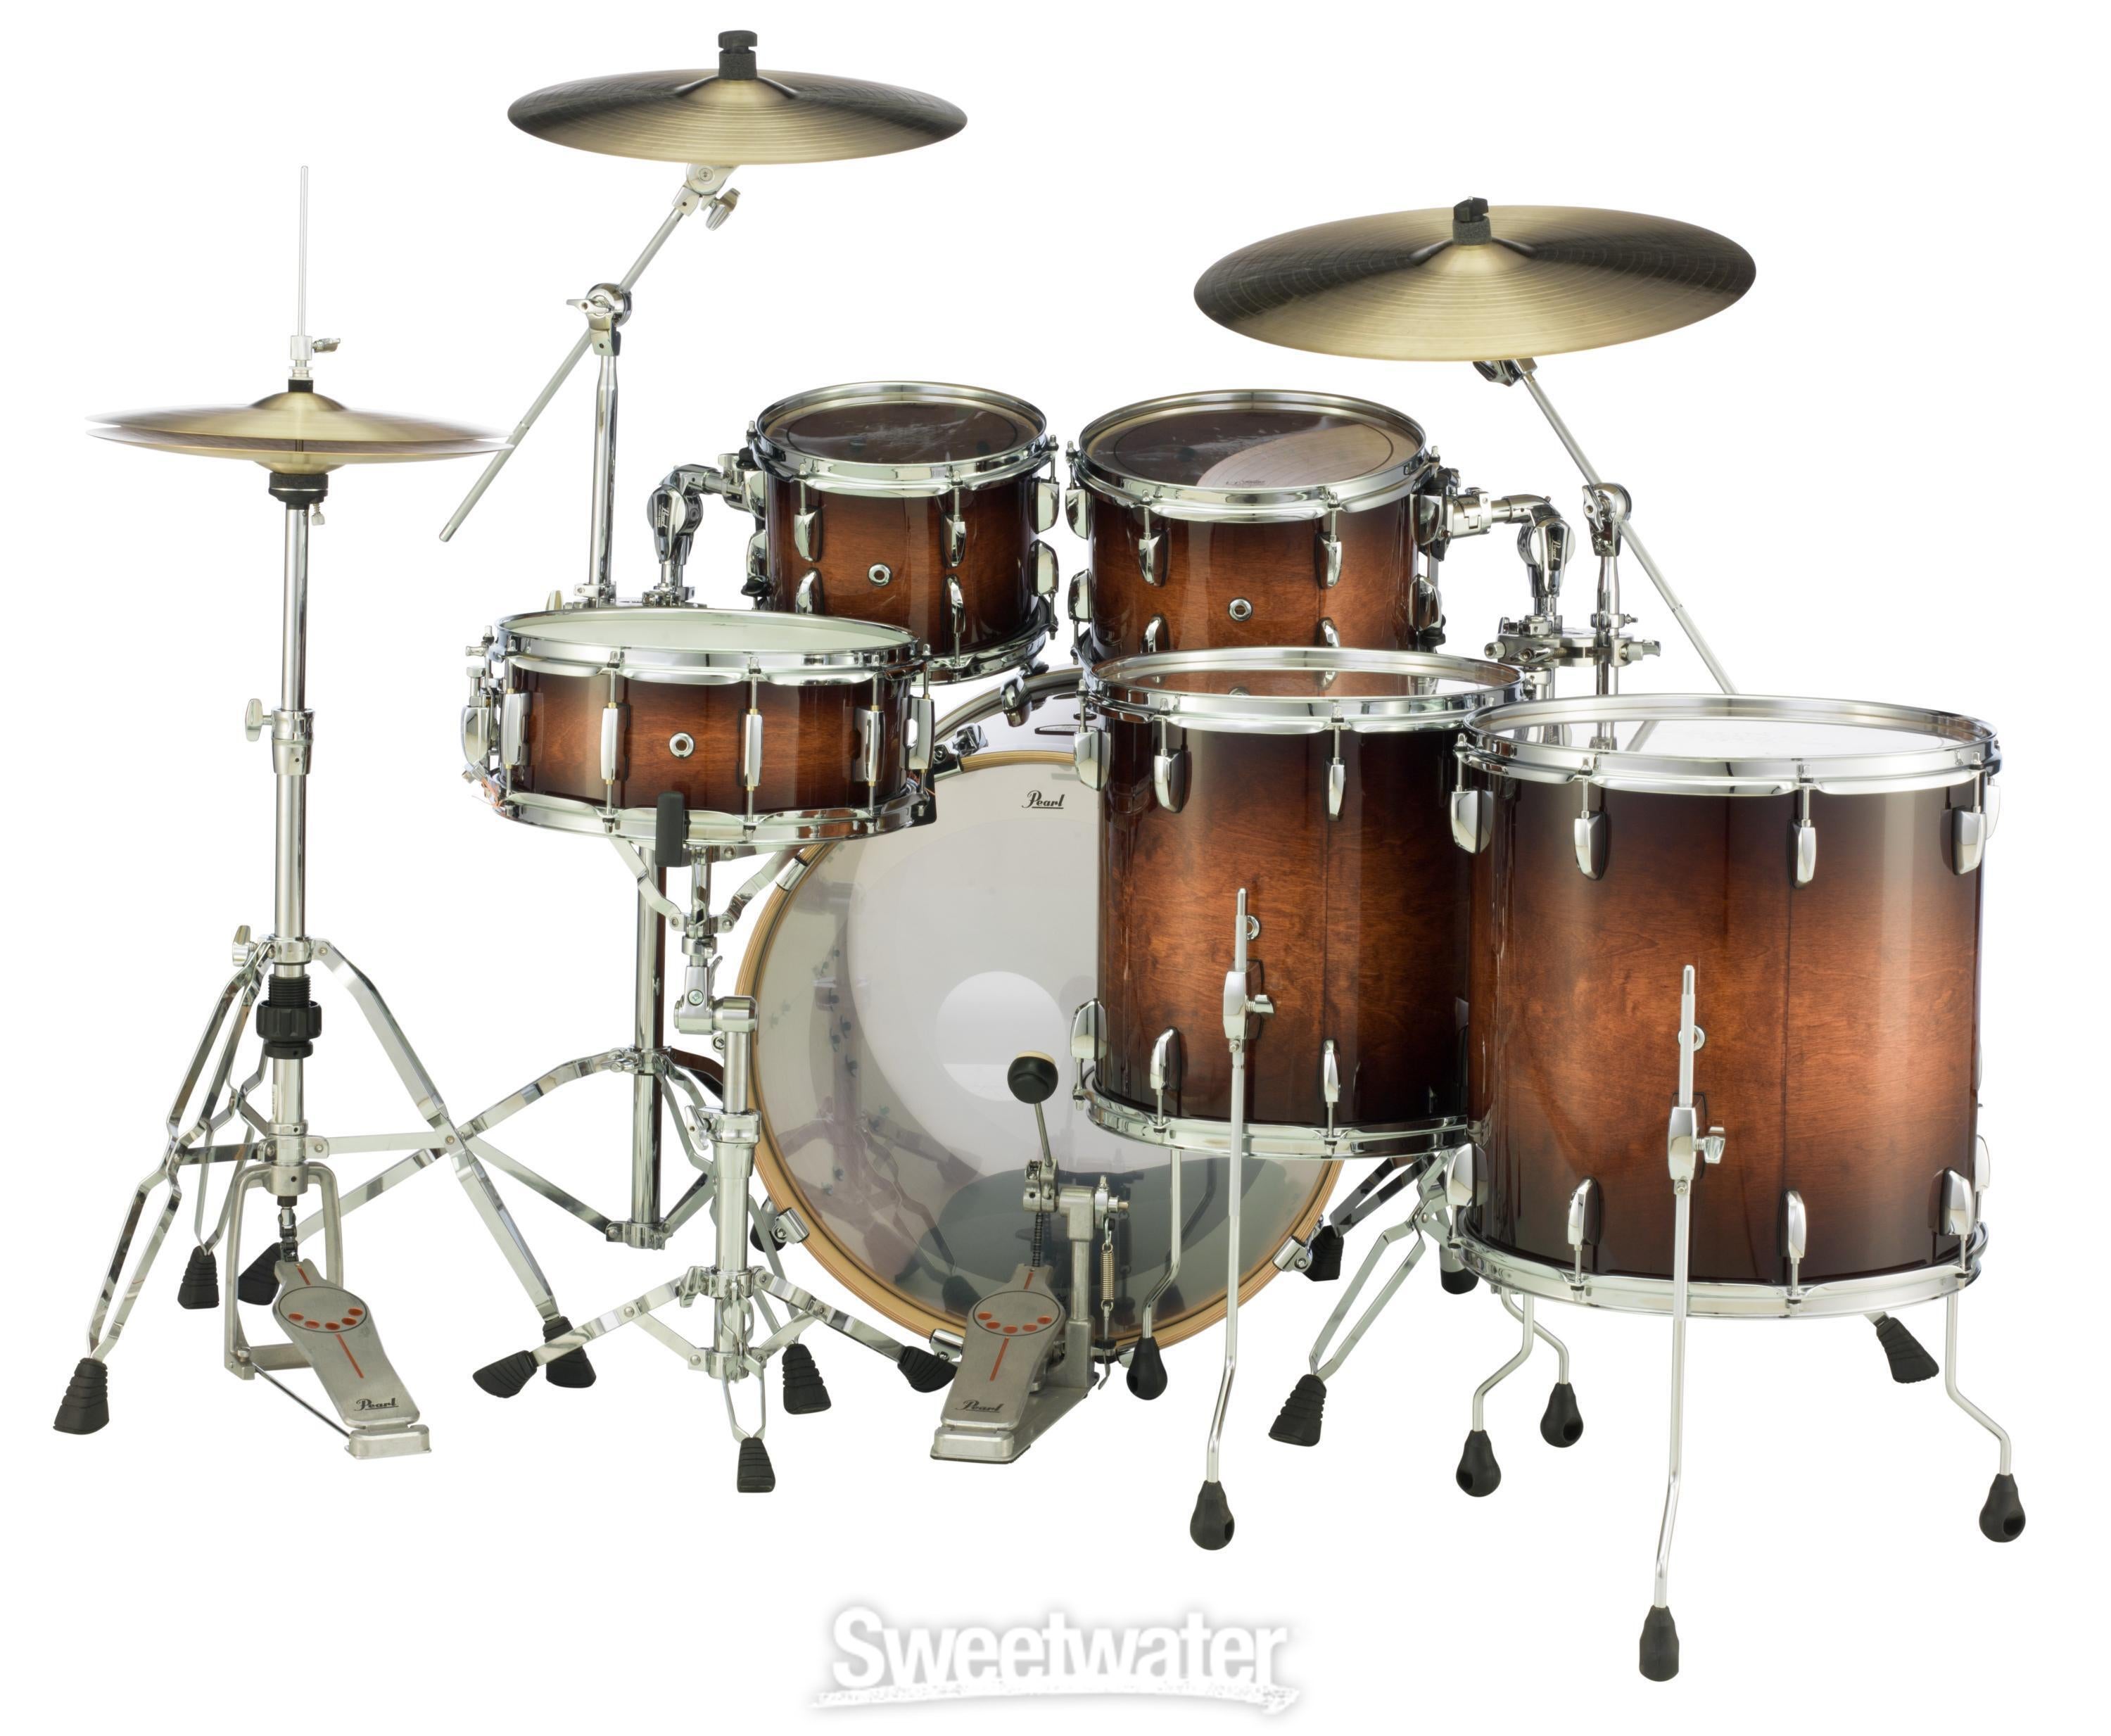 Pearl Session Studio Select STS925XSP/C 5-piece Shell Pack - Gloss